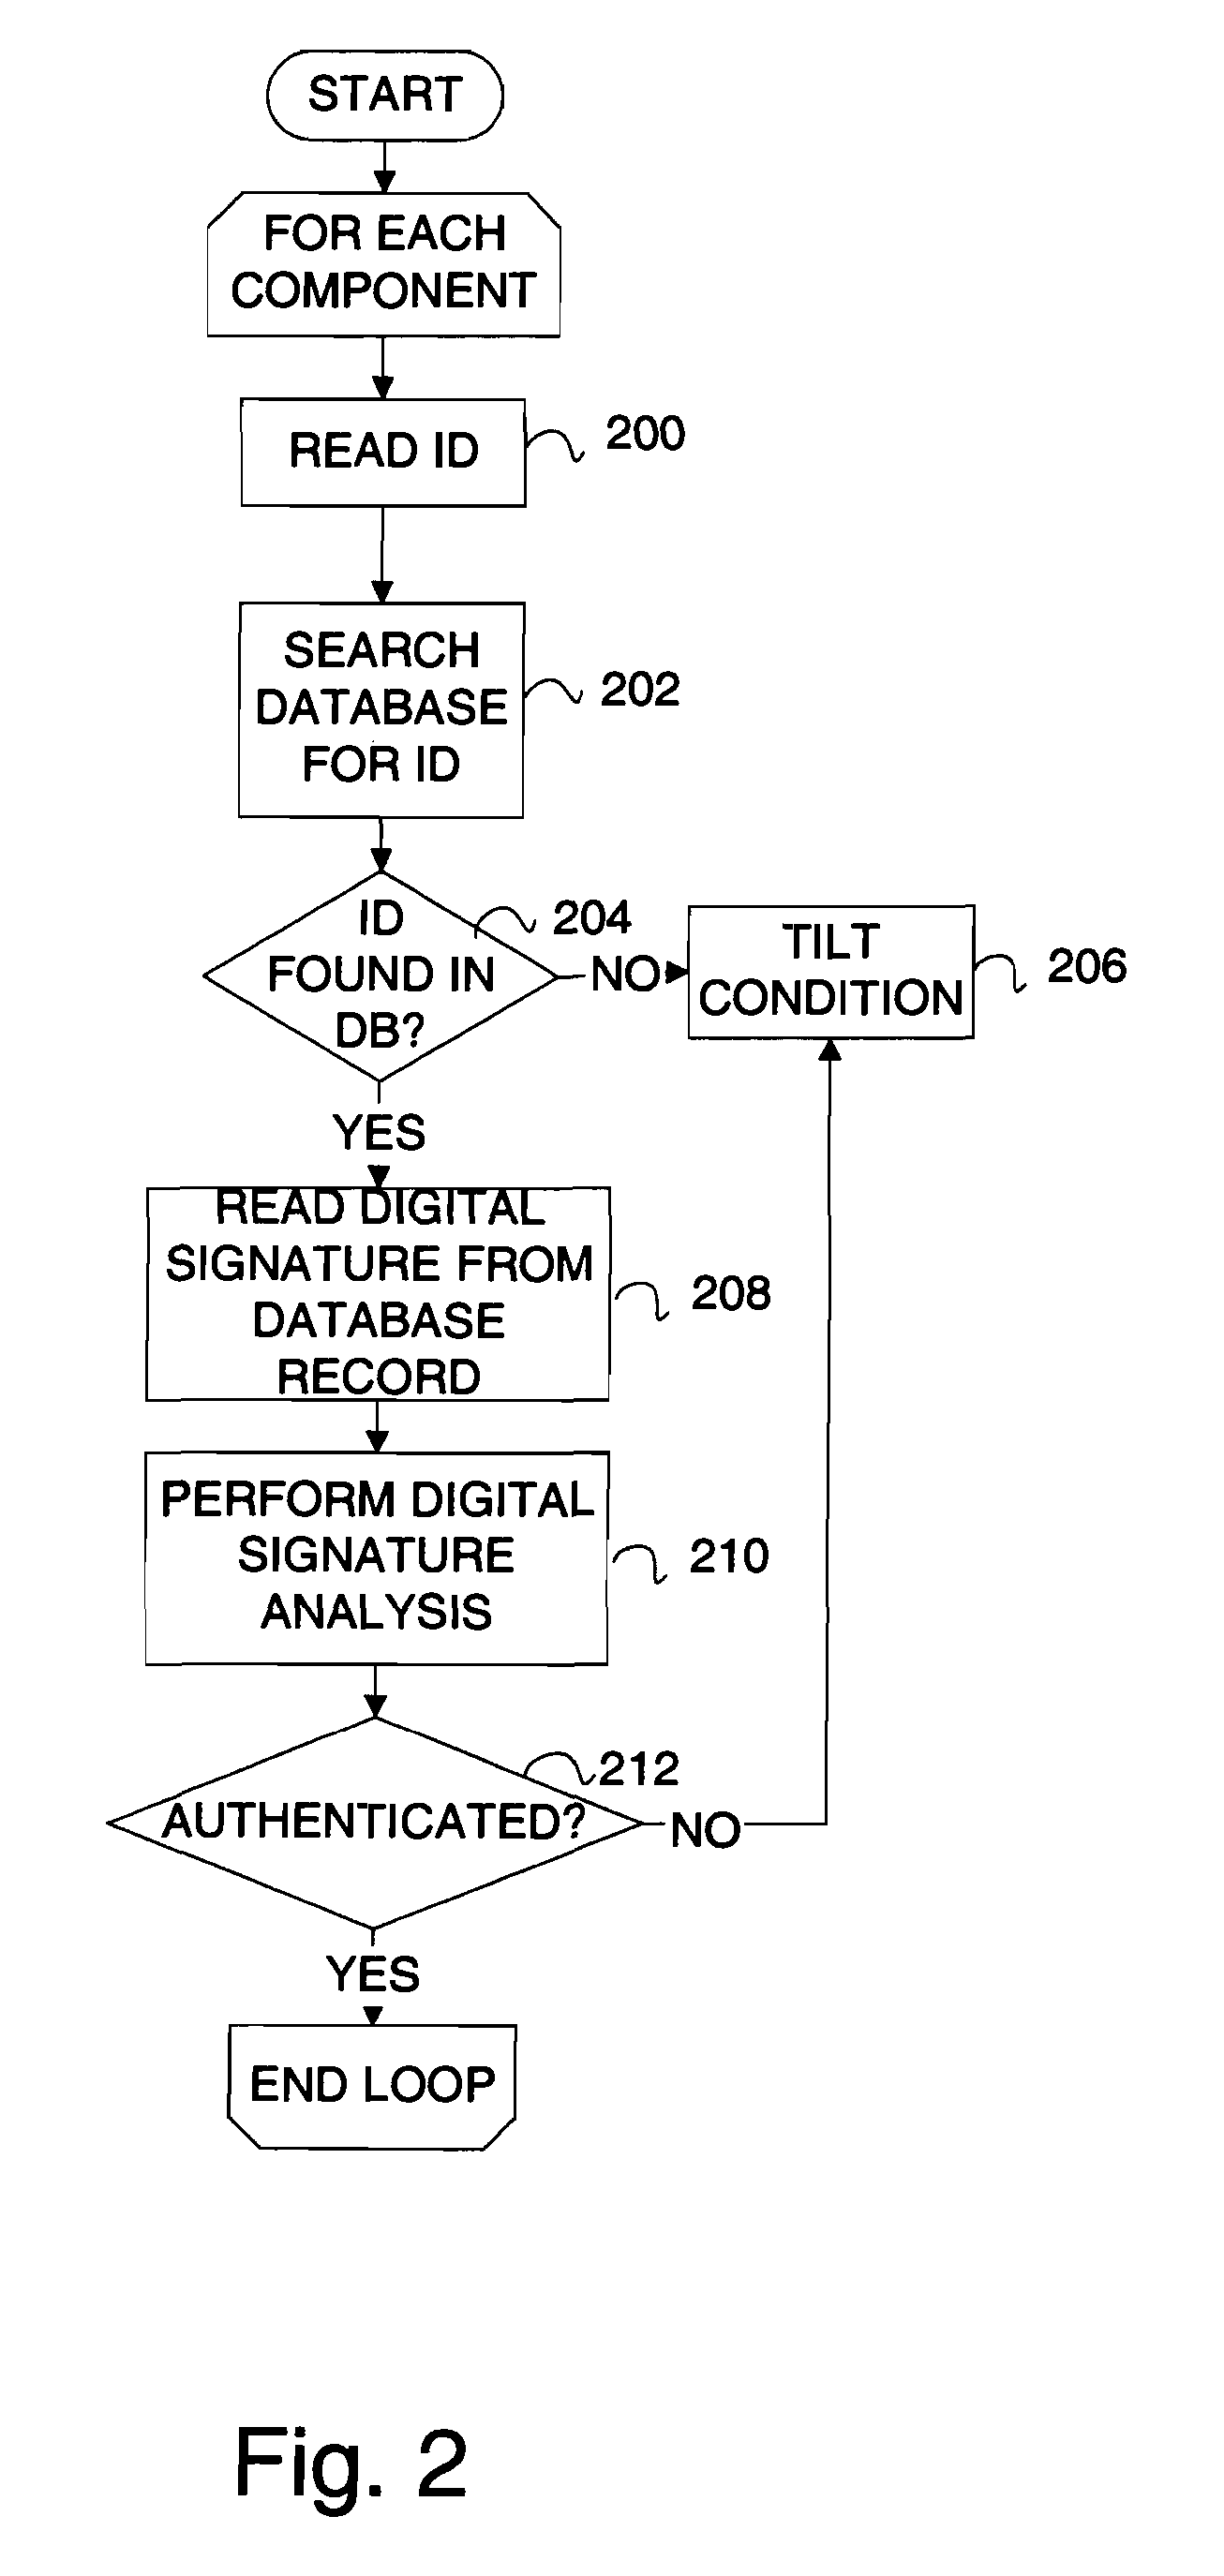 Gaming device verification system and method using a file allocation structure